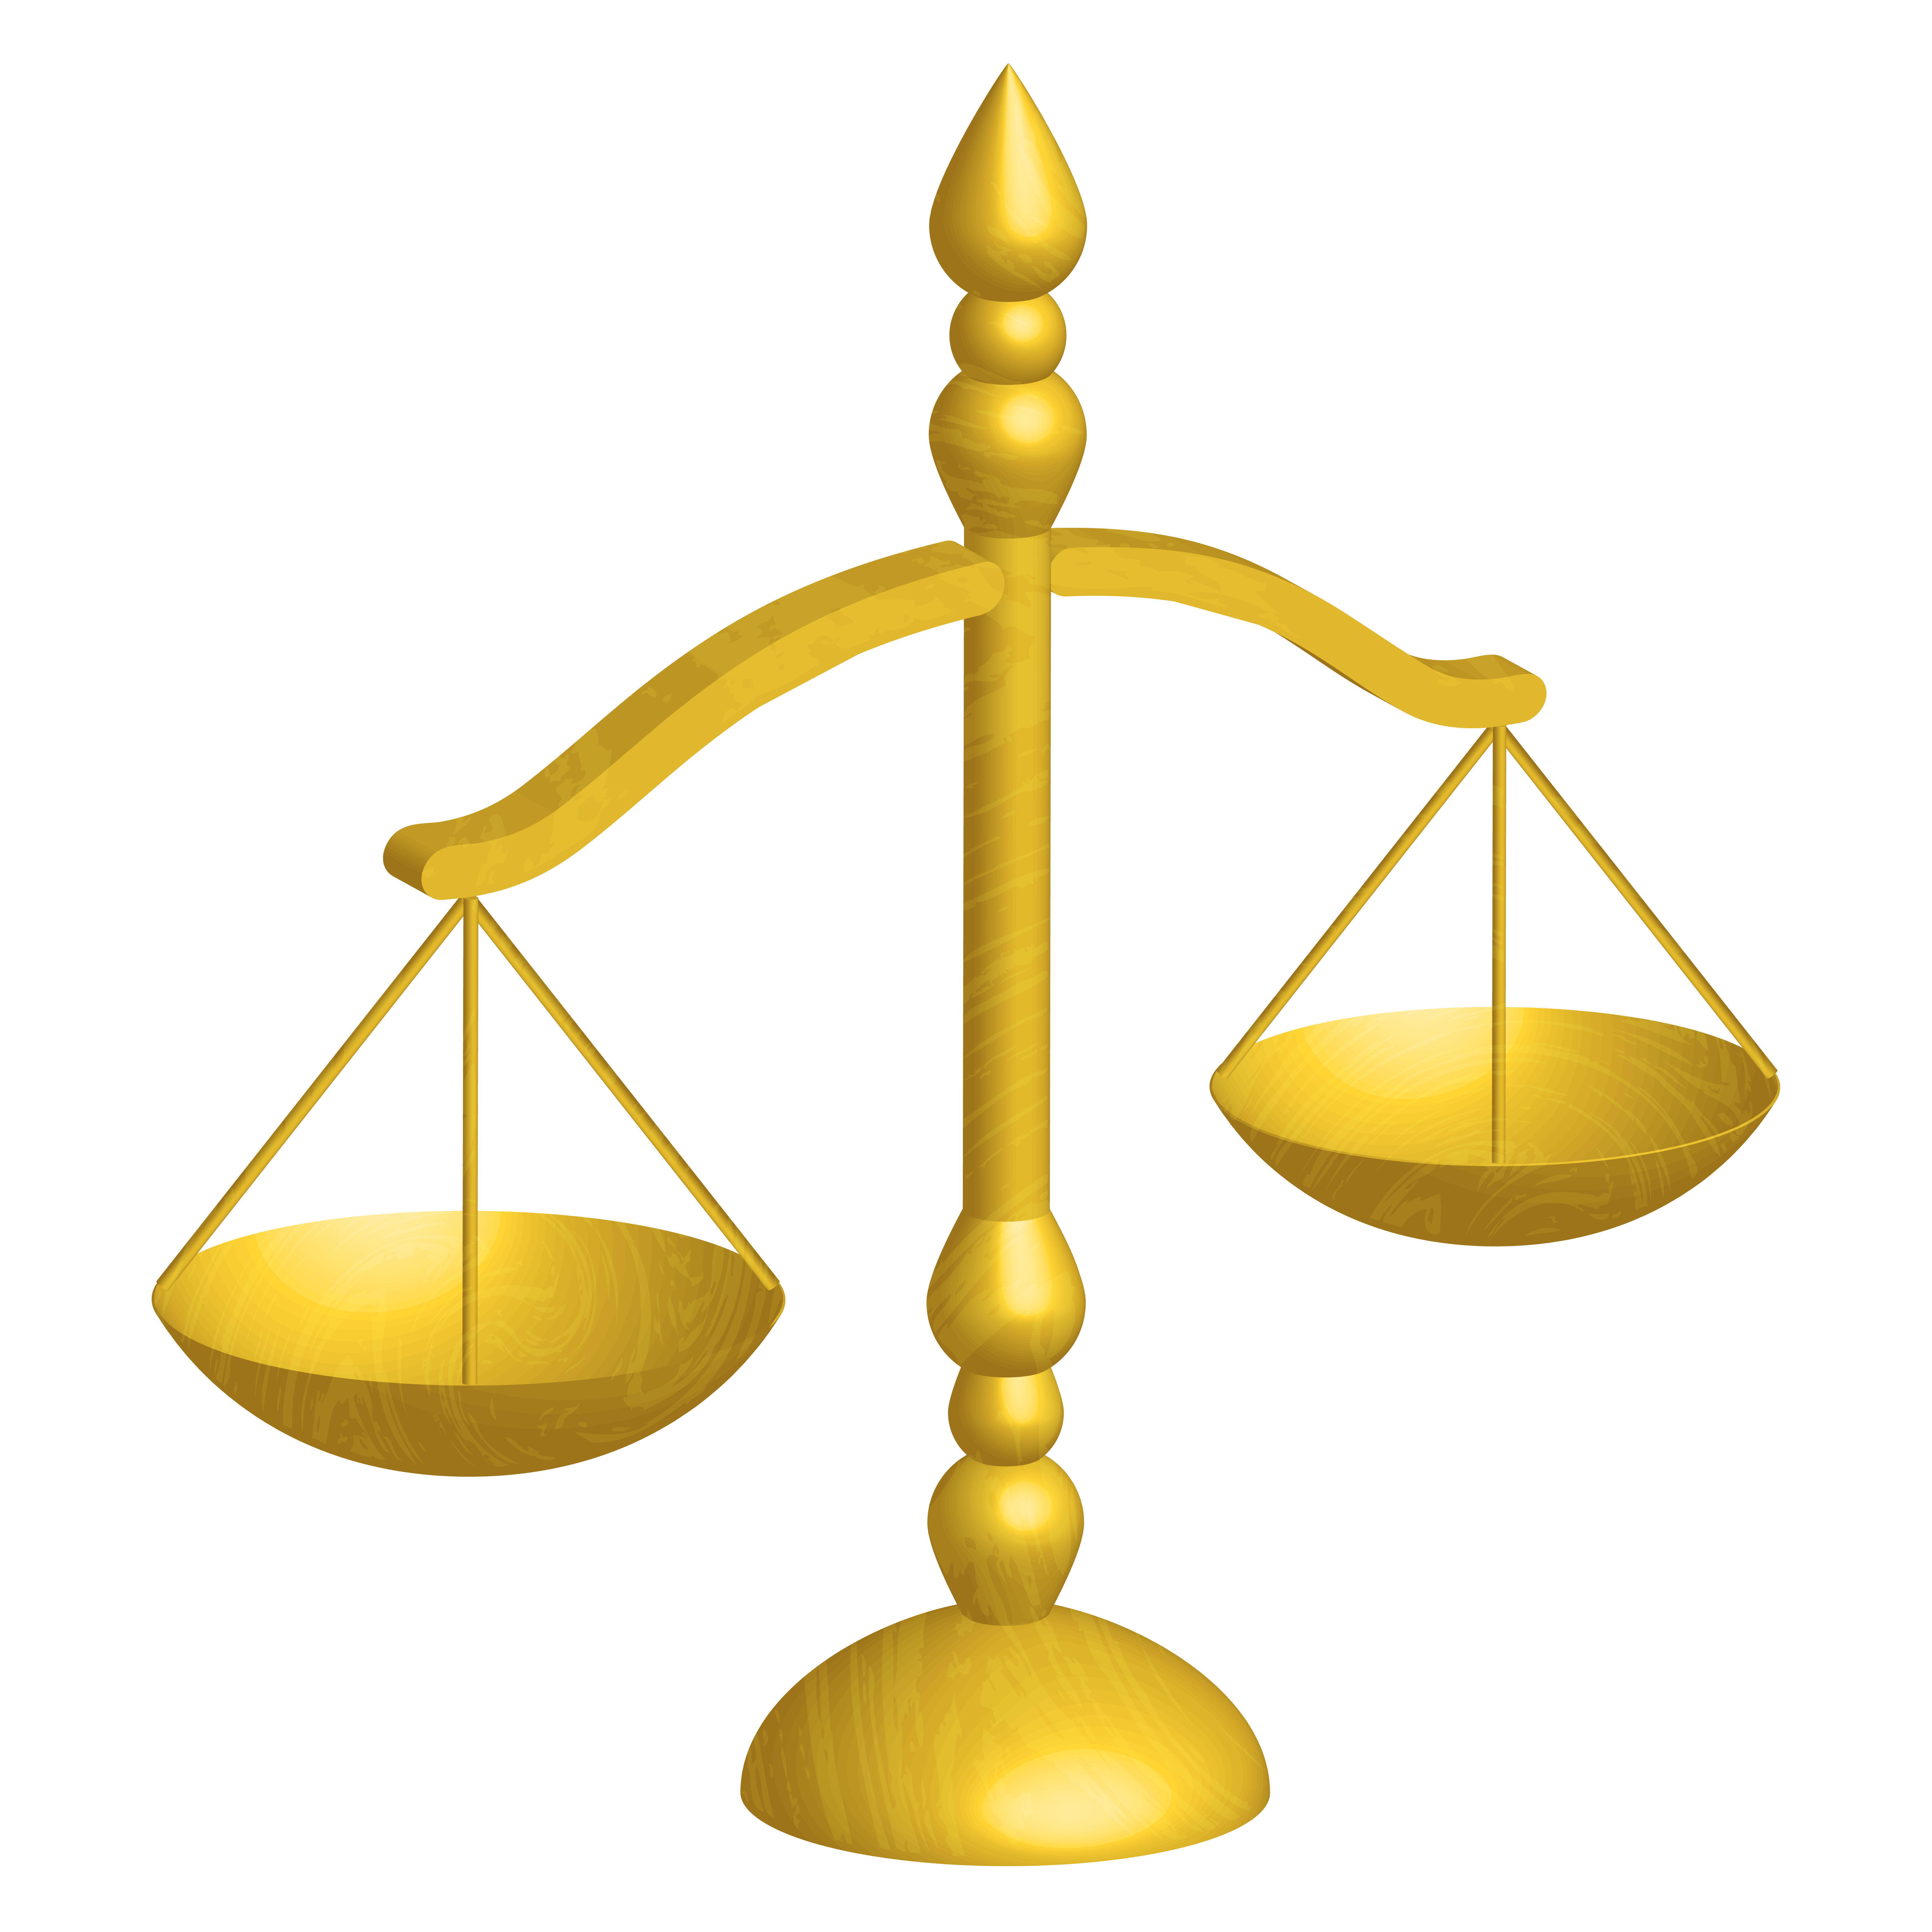 free clipart images scales of justice - photo #8